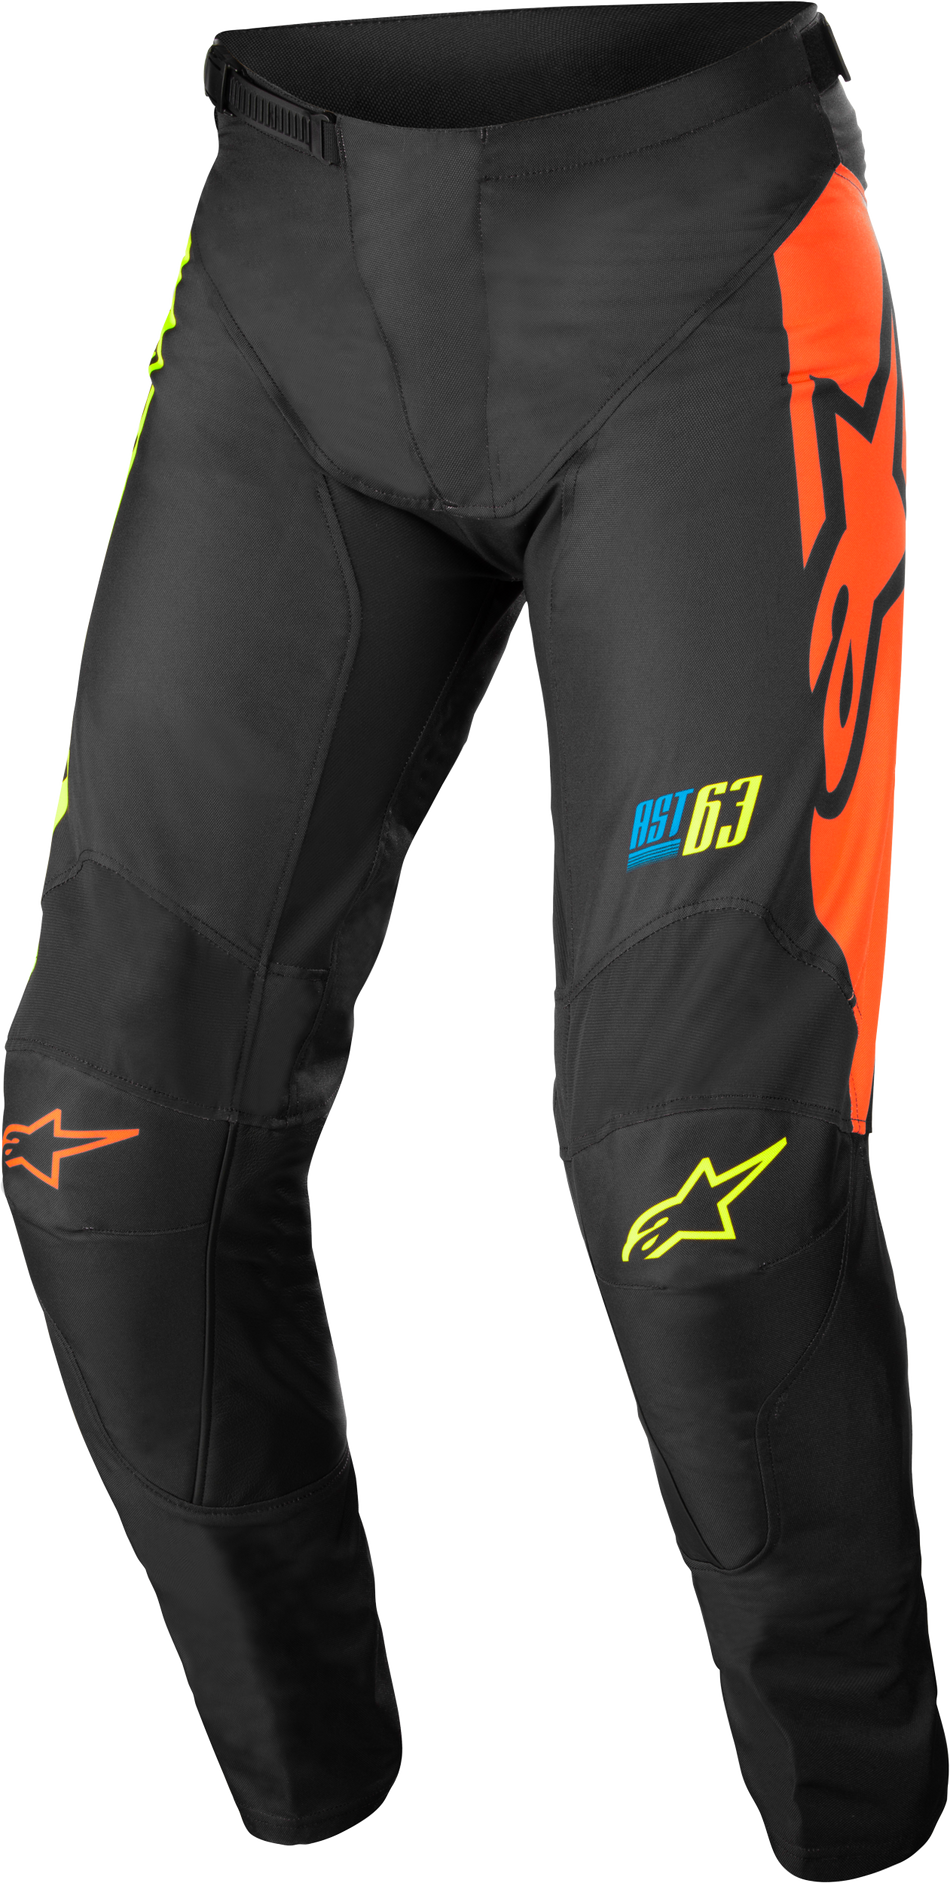 ALPINESTARS Youth Racer Compass Pants Black/Yellow Fluo/Coral Sz 26 3742122-1534-26